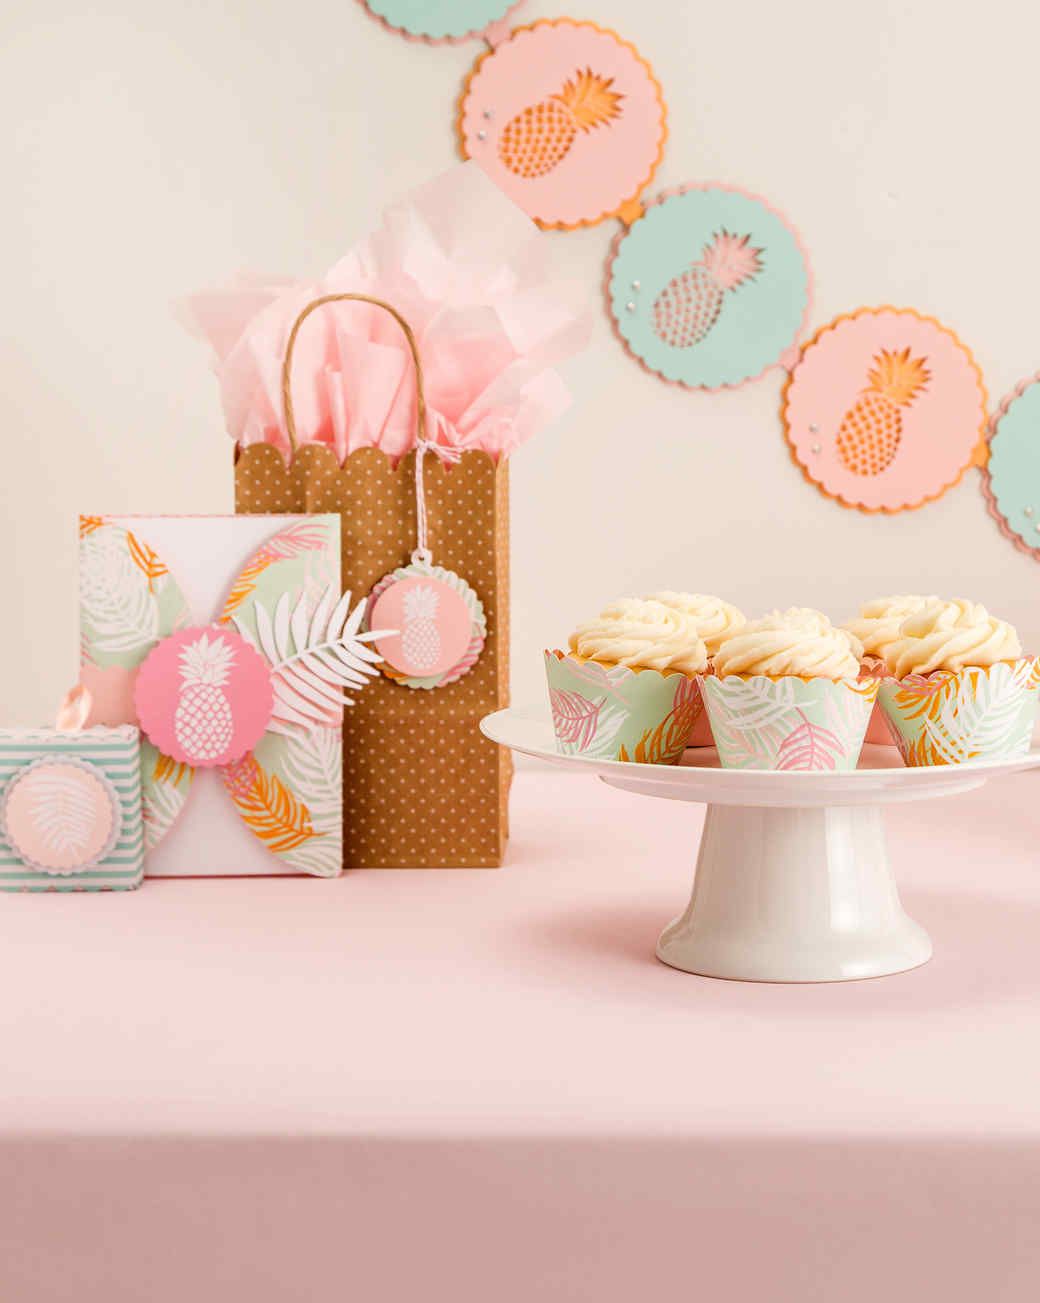 cricut pineapple party cupcakes gift baskets decorations